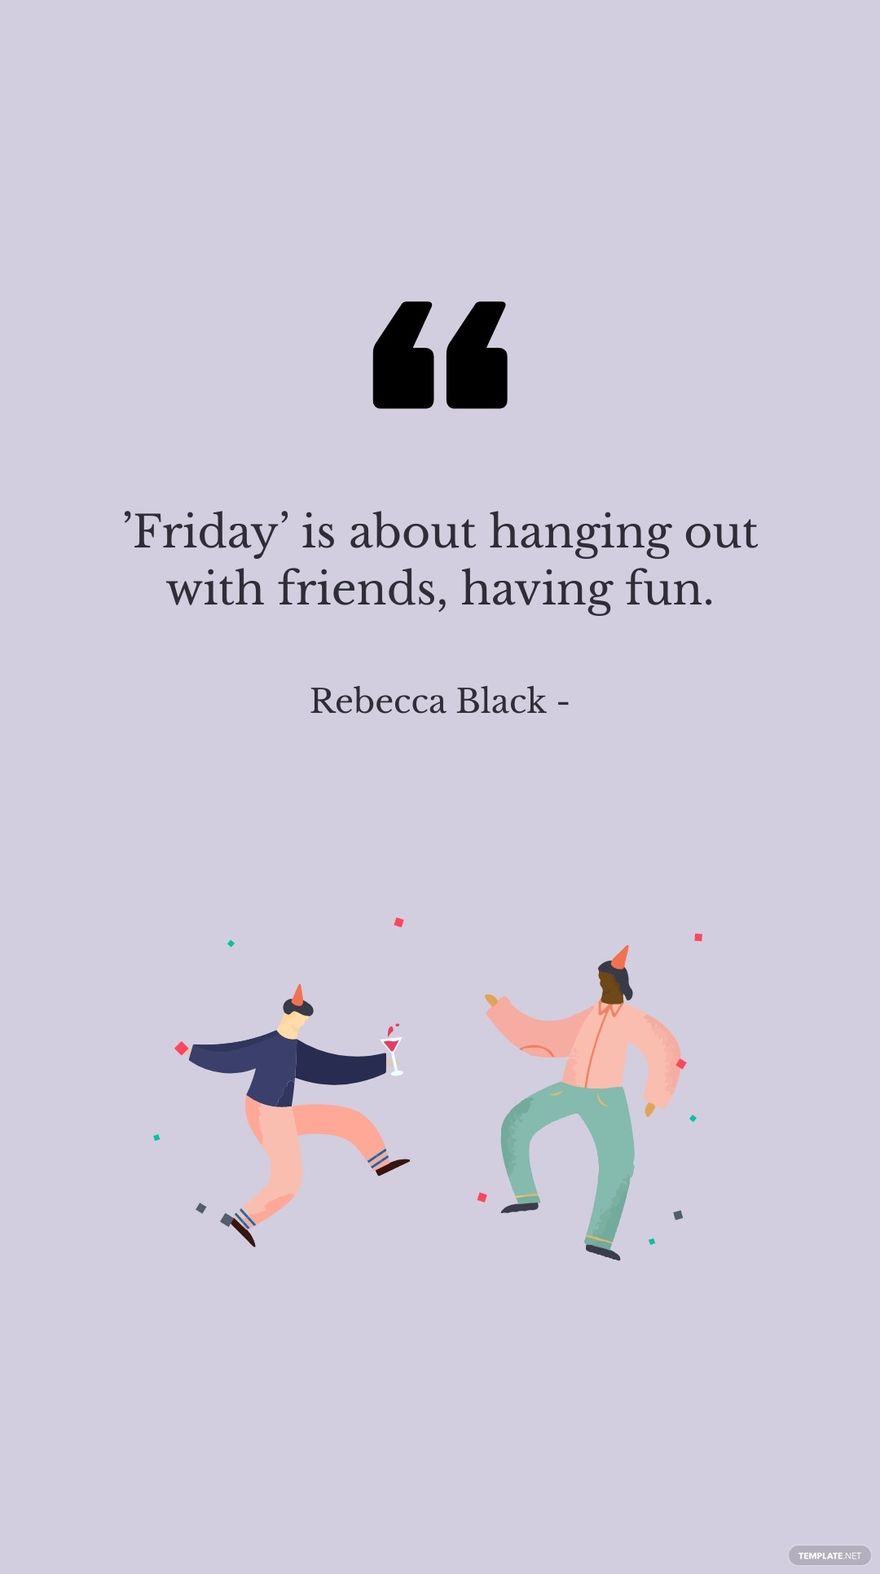 Rebecca Black - ’Friday’ is about hanging out with friends, having fun.